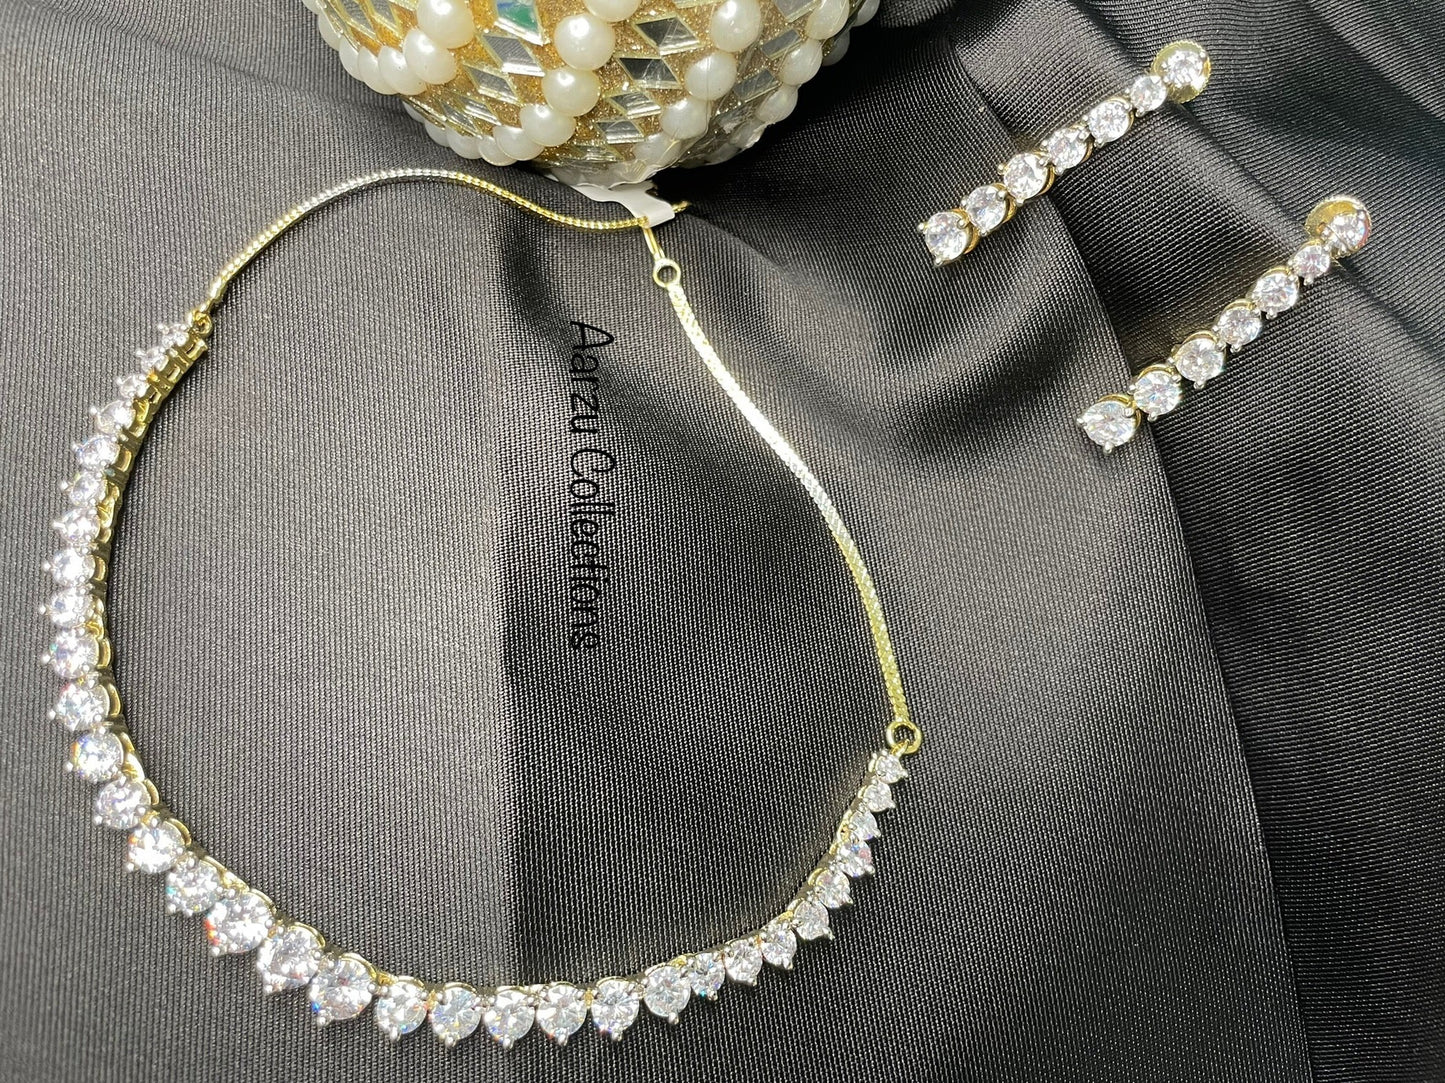 Contemporary American Diamond Necklace and Earrings Set